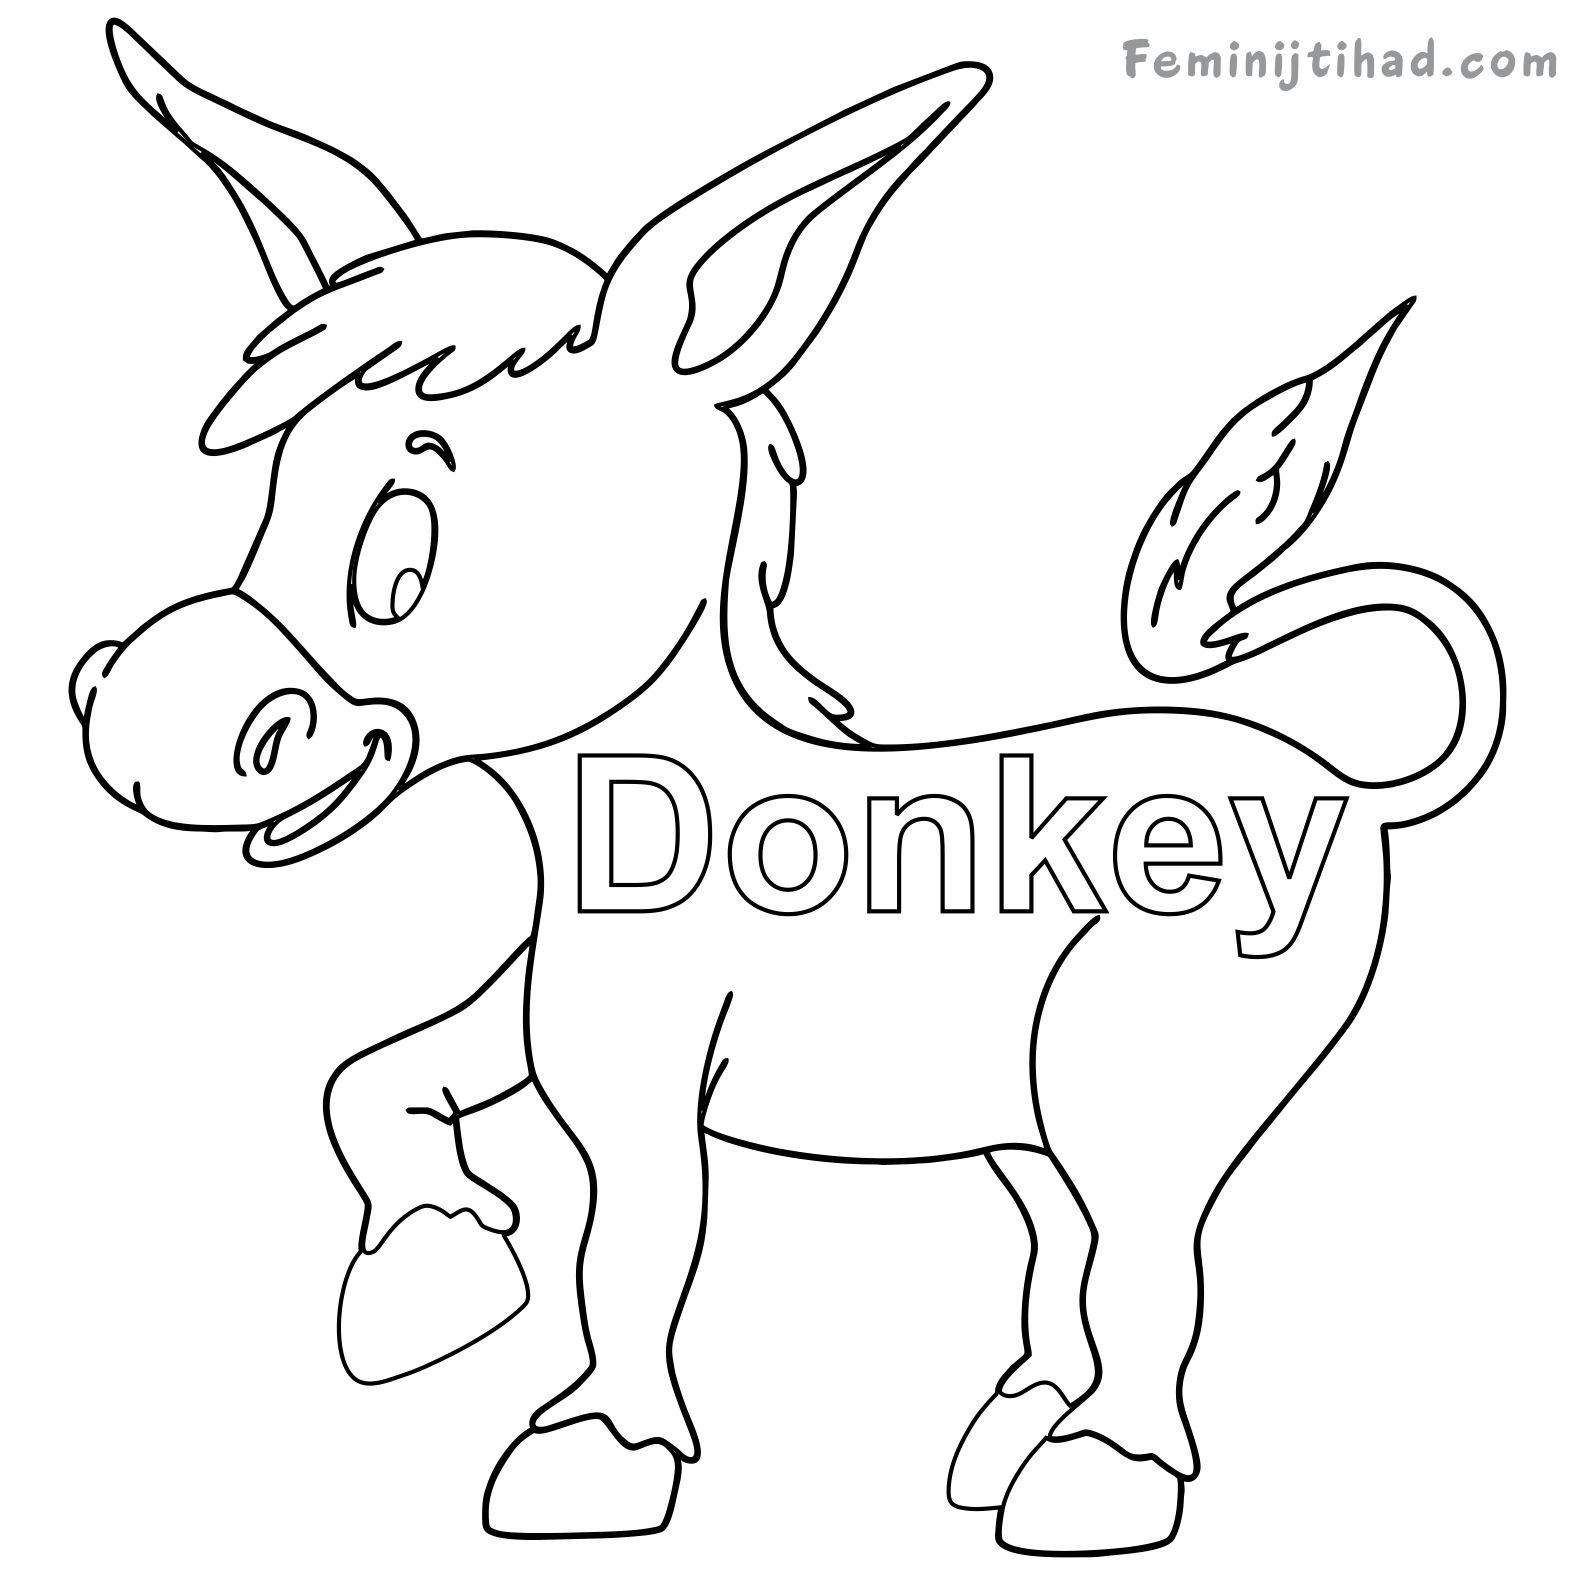 donkey-template-printable-printable-word-searches